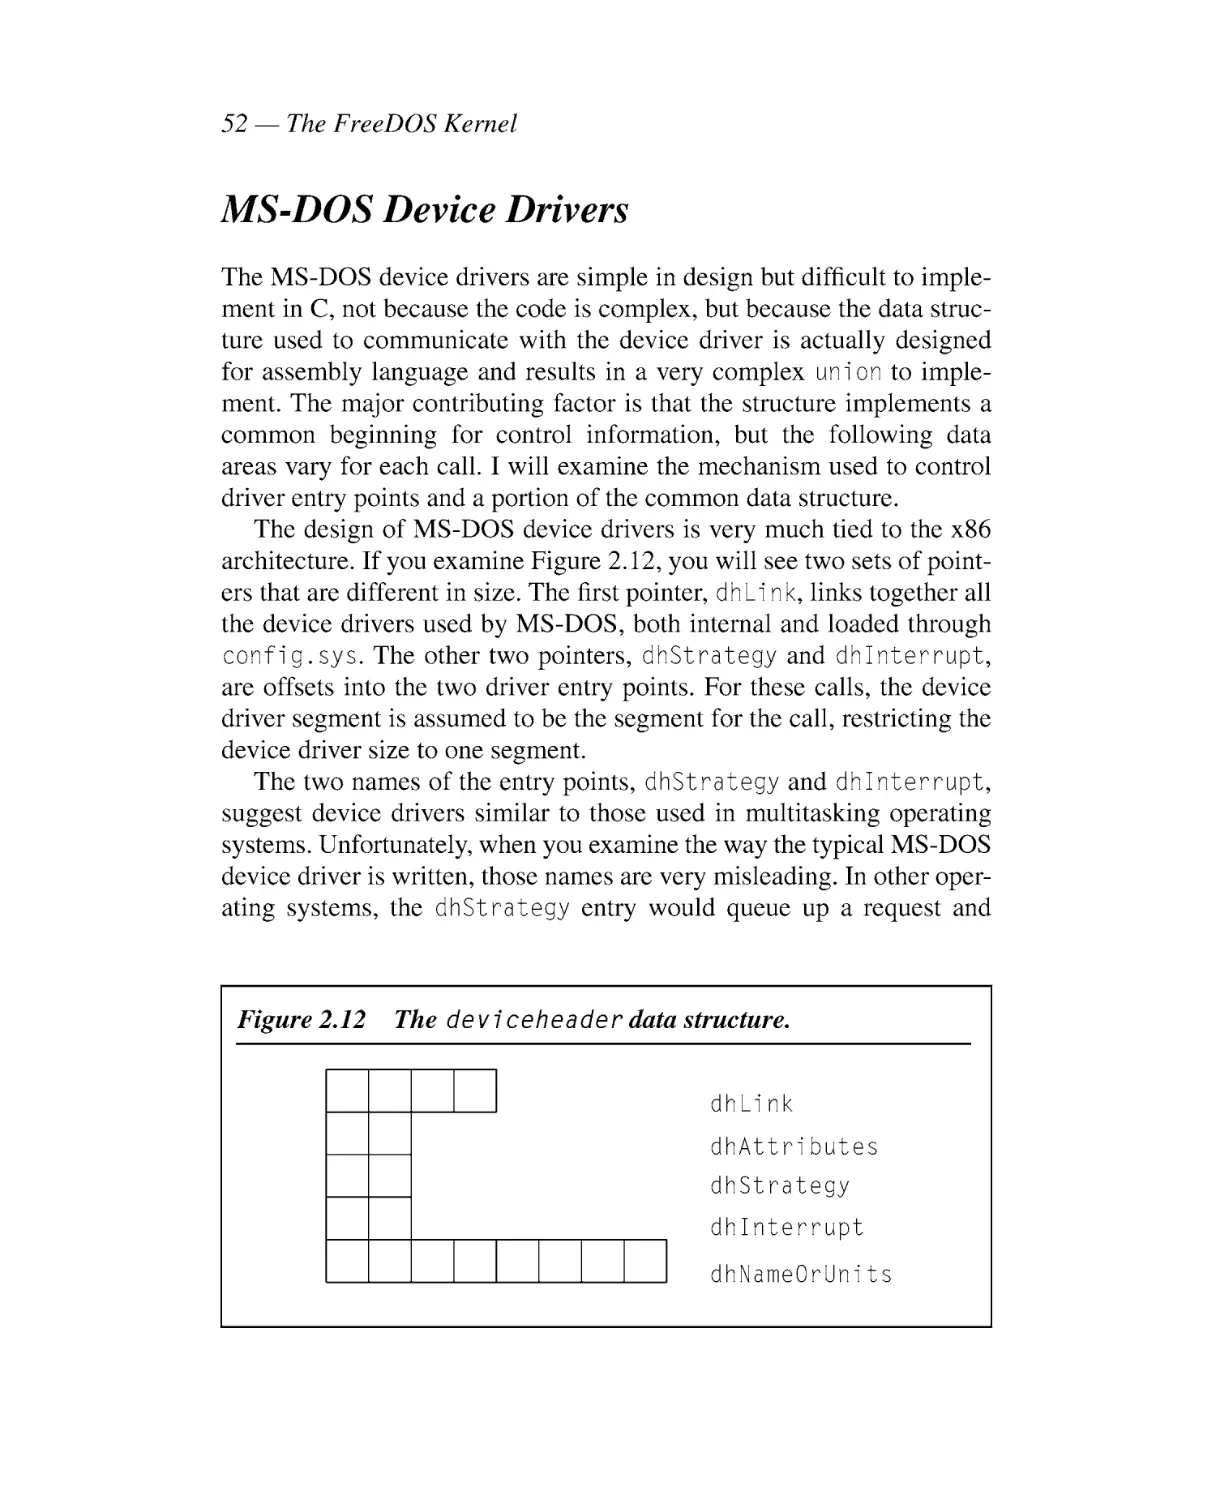 MS-DOS Device Drivers